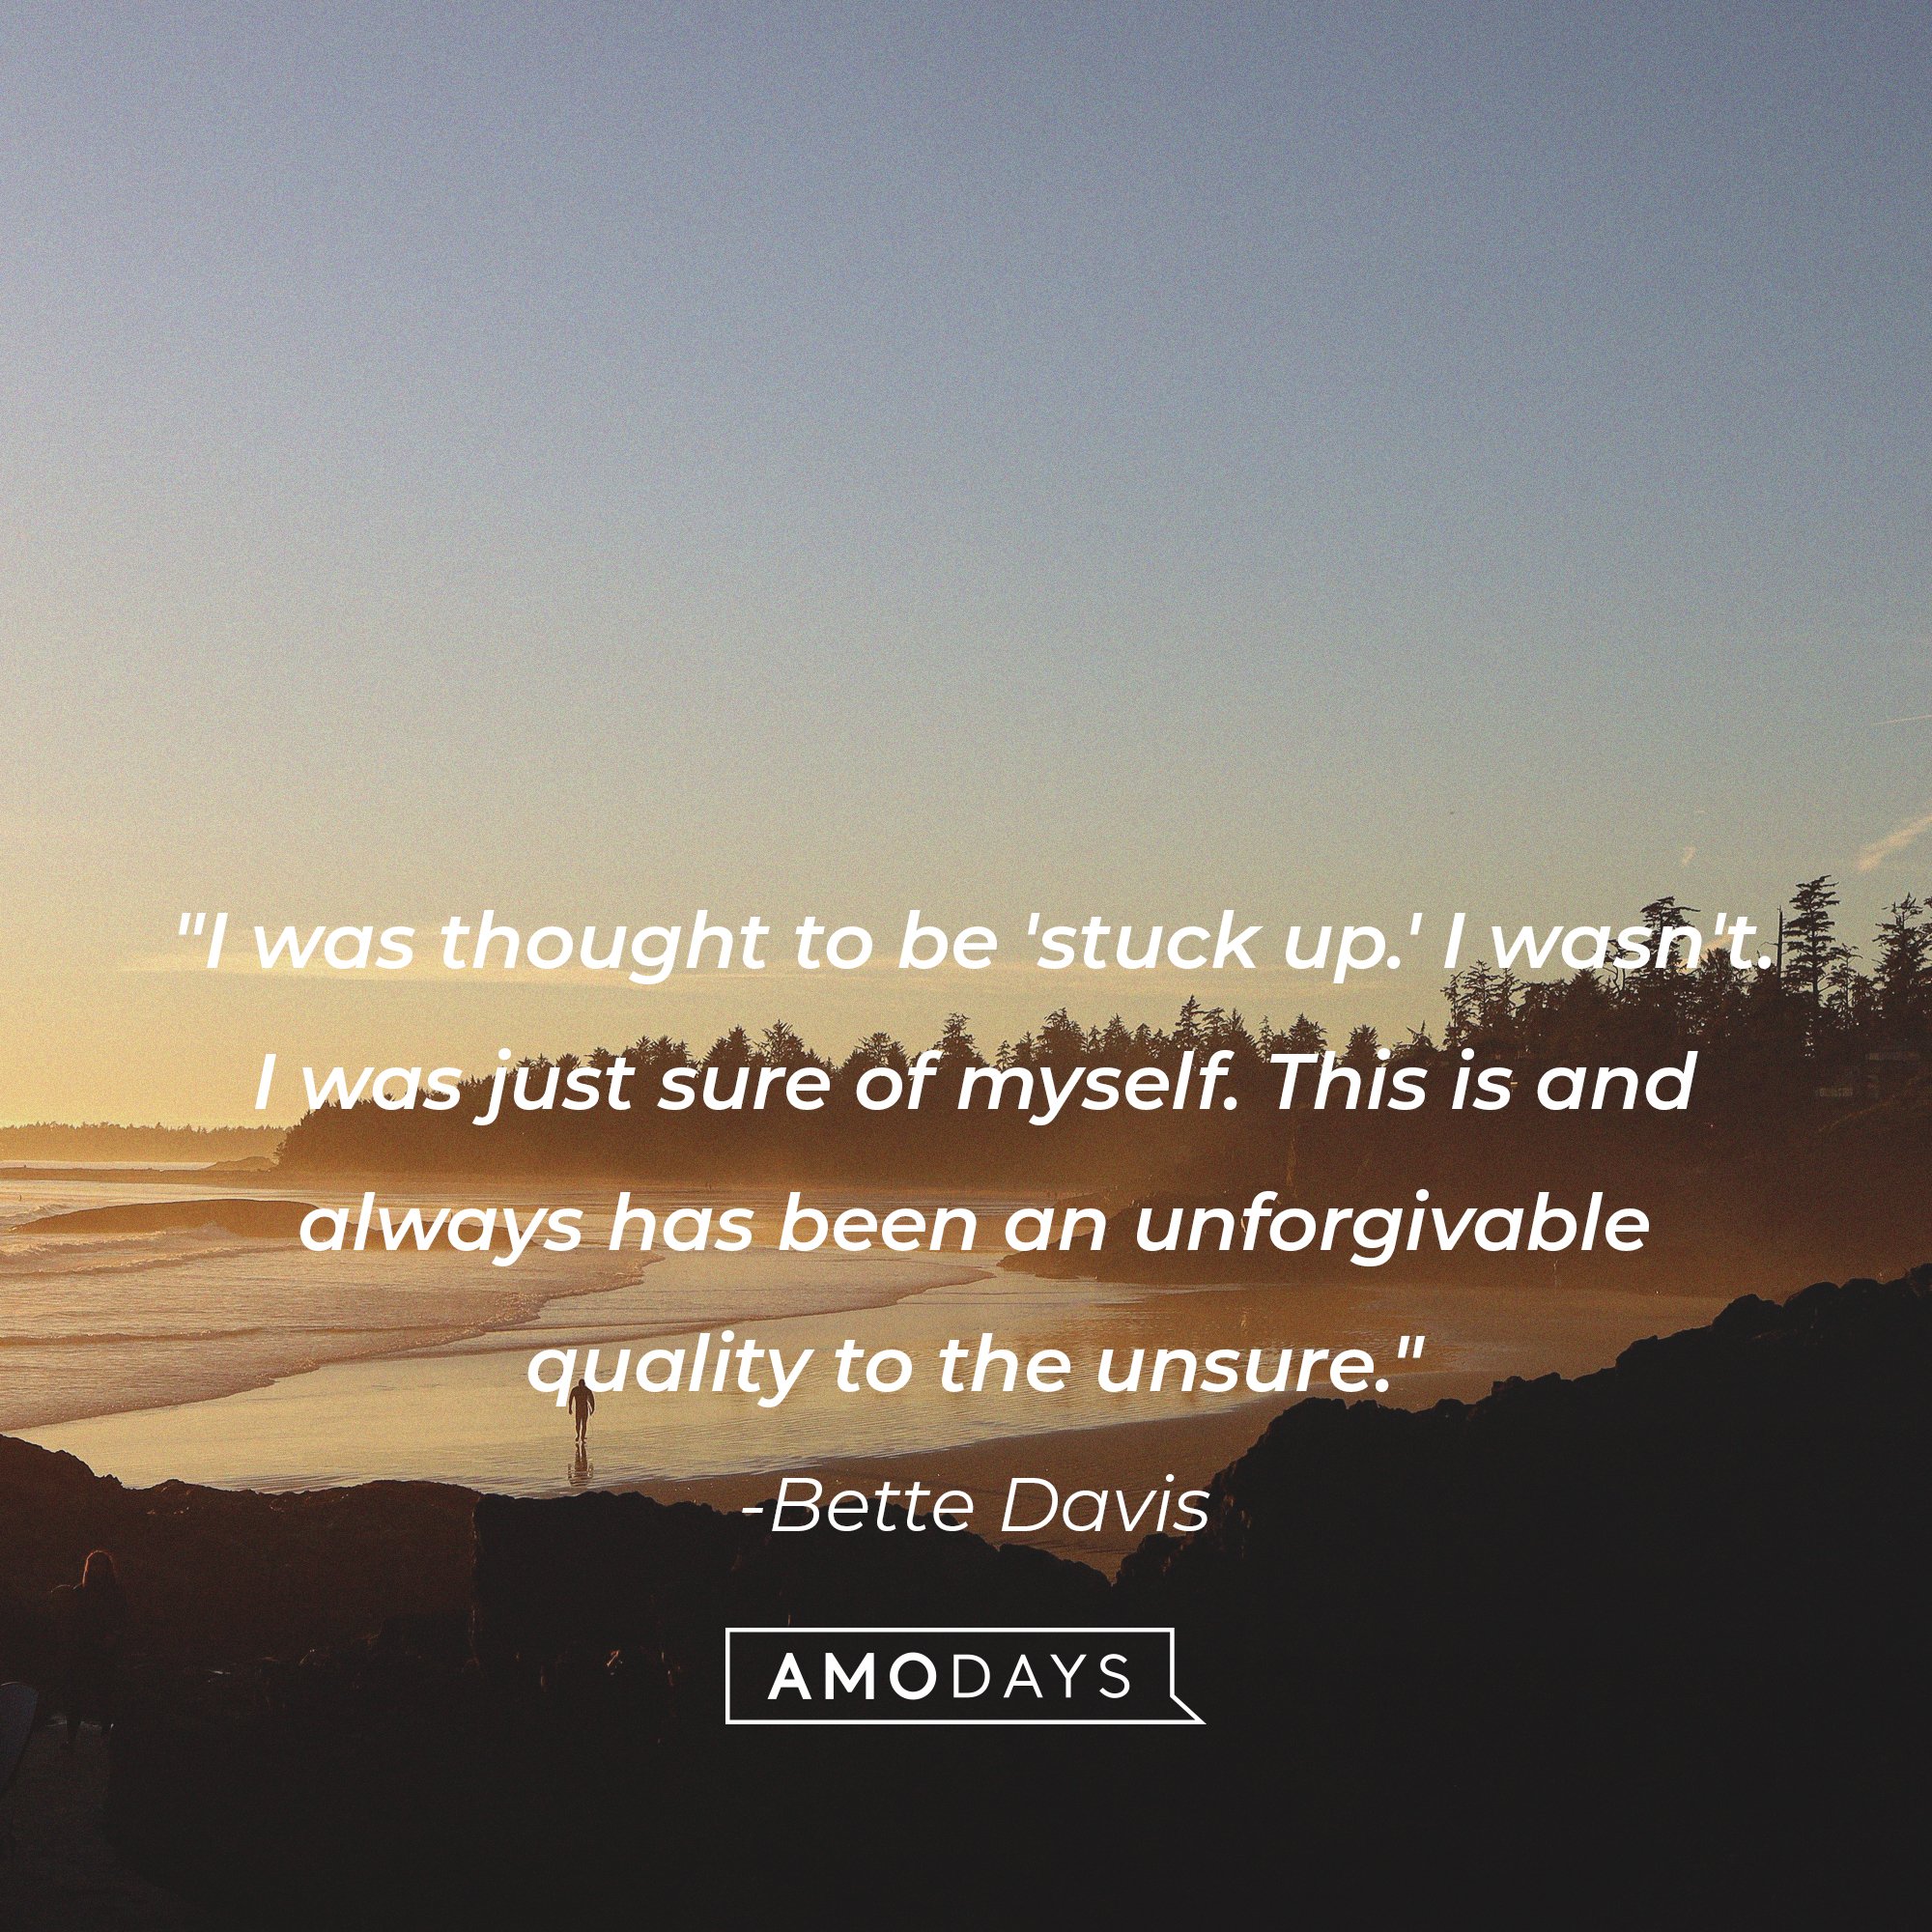 Bette Davis' quote: "I was thought to be 'stuck up.' I wasn't. I was just sure of myself. This is and always has been an unforgivable quality to the unsure." | Image: AmoDays